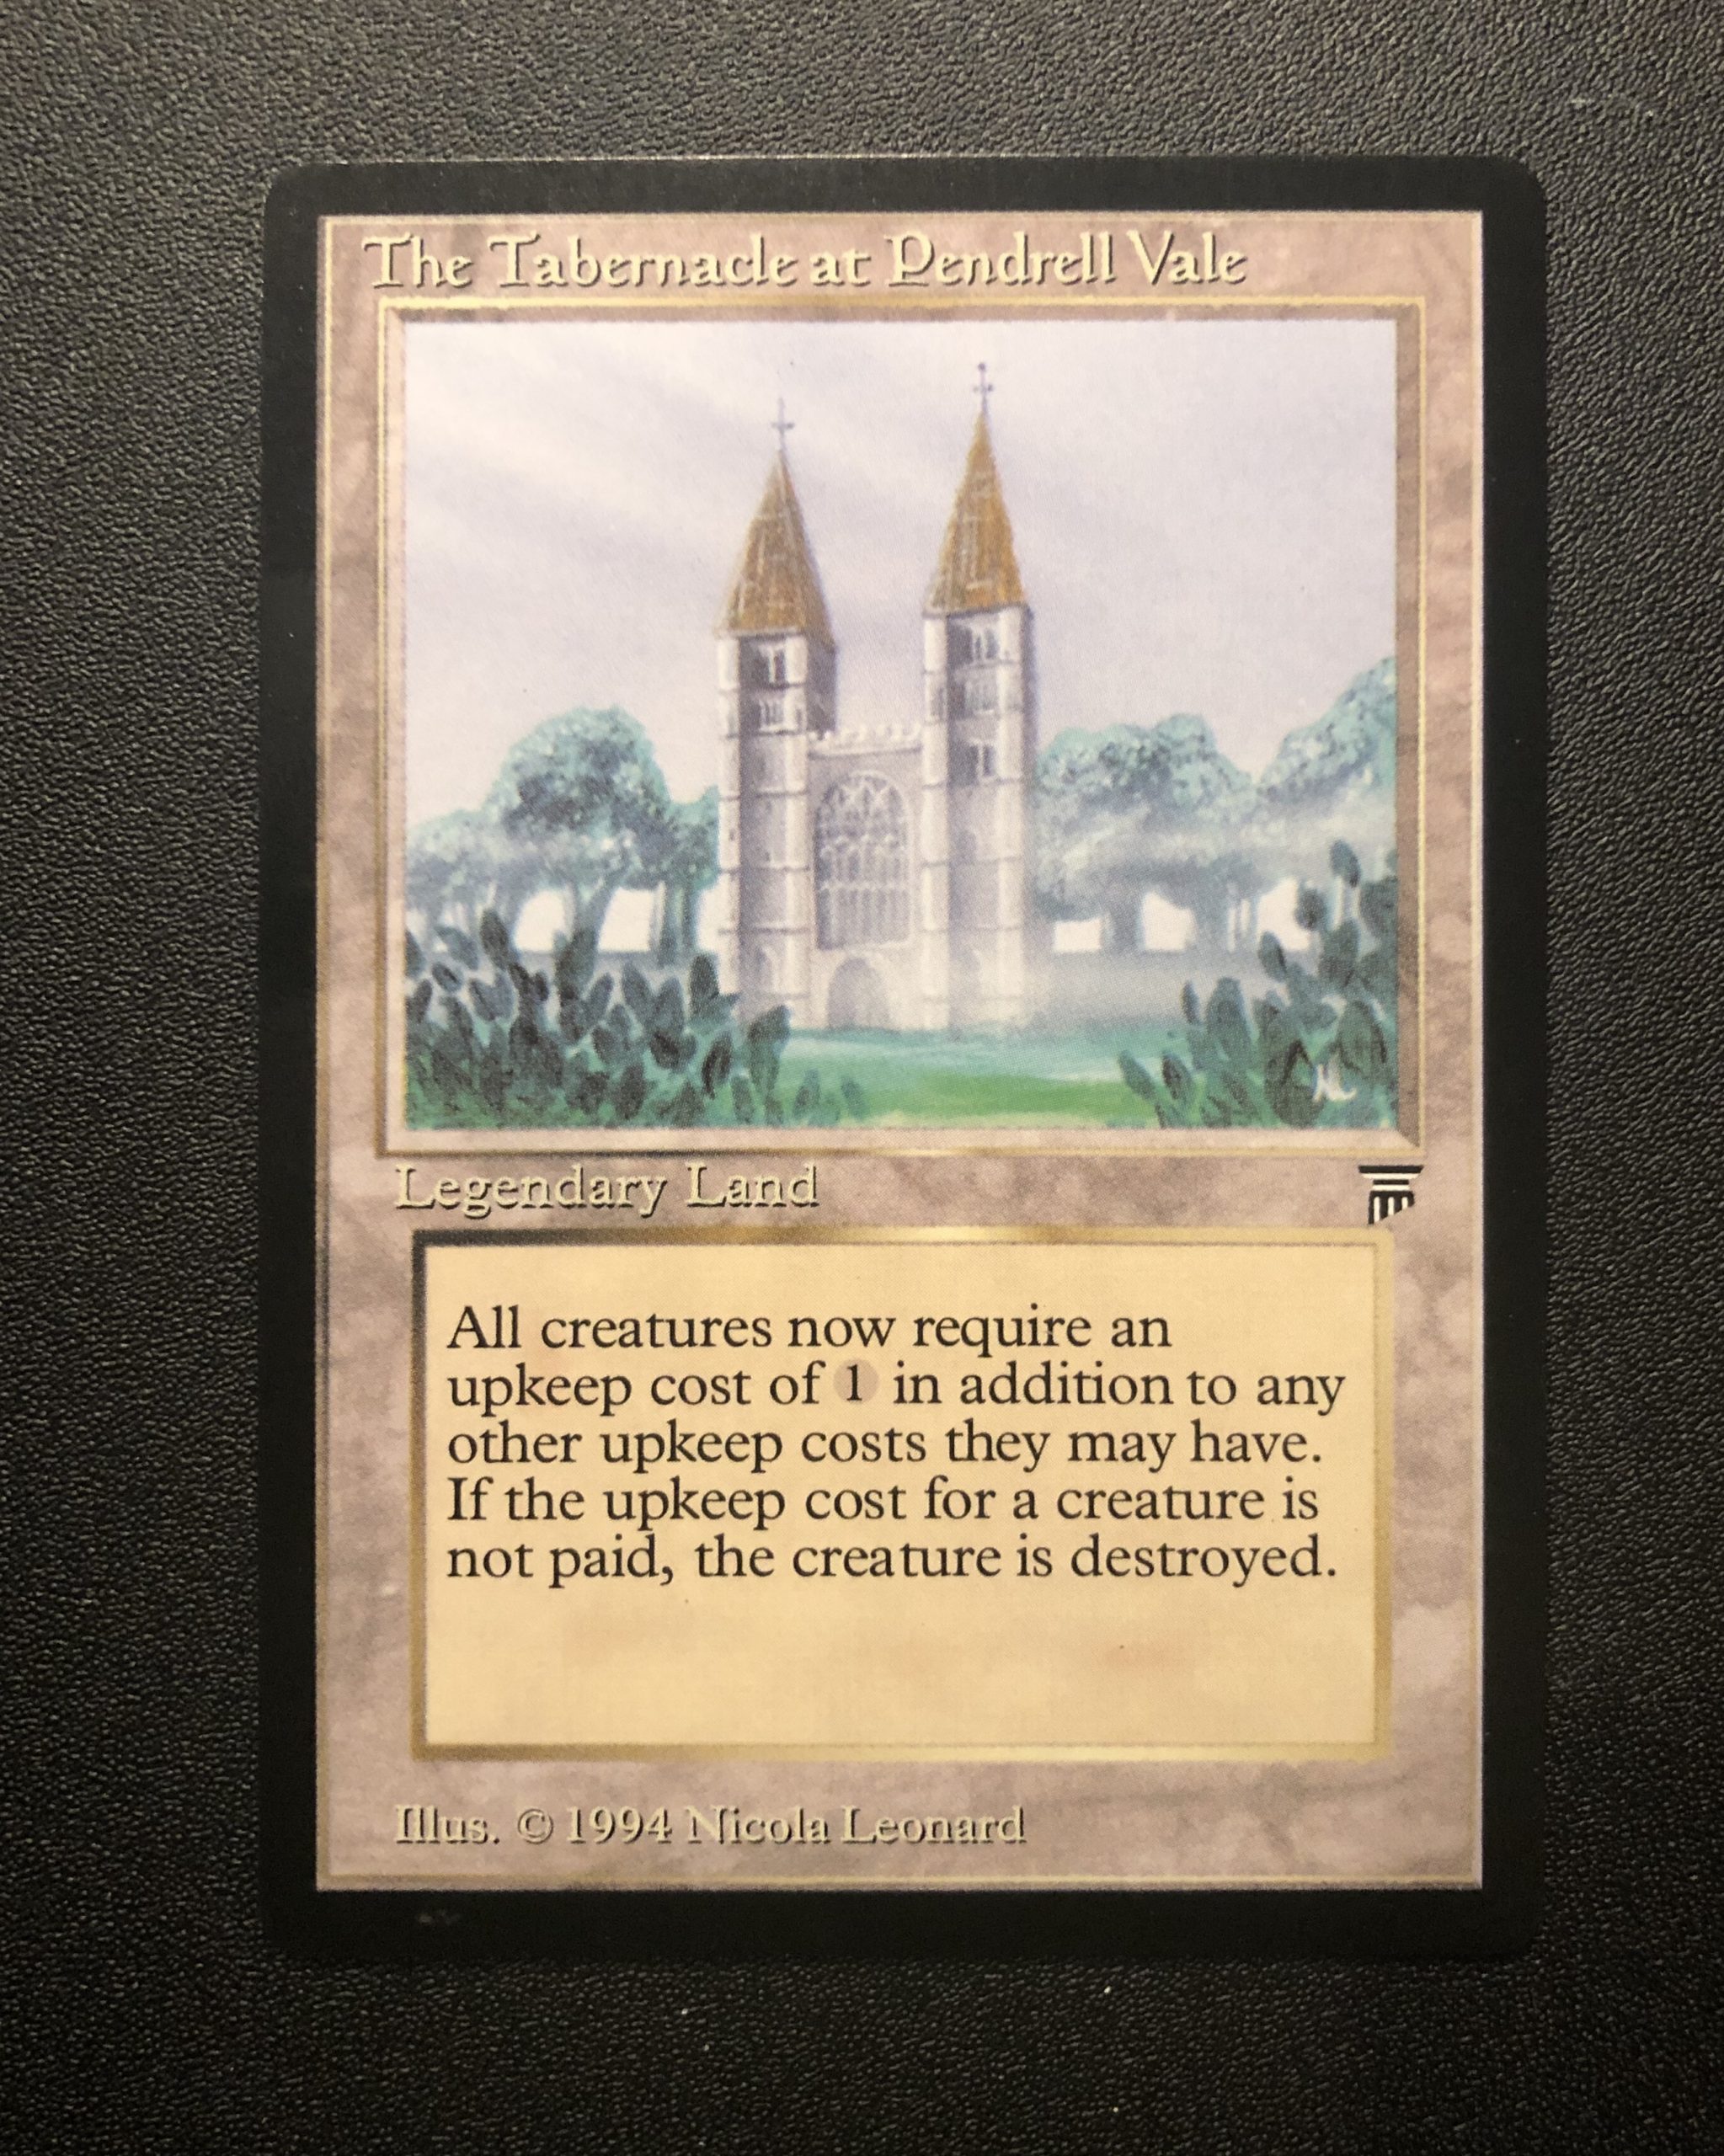 Tabernacle at Pendrell Vale, The - MTG Proxy Legends - Proxy King